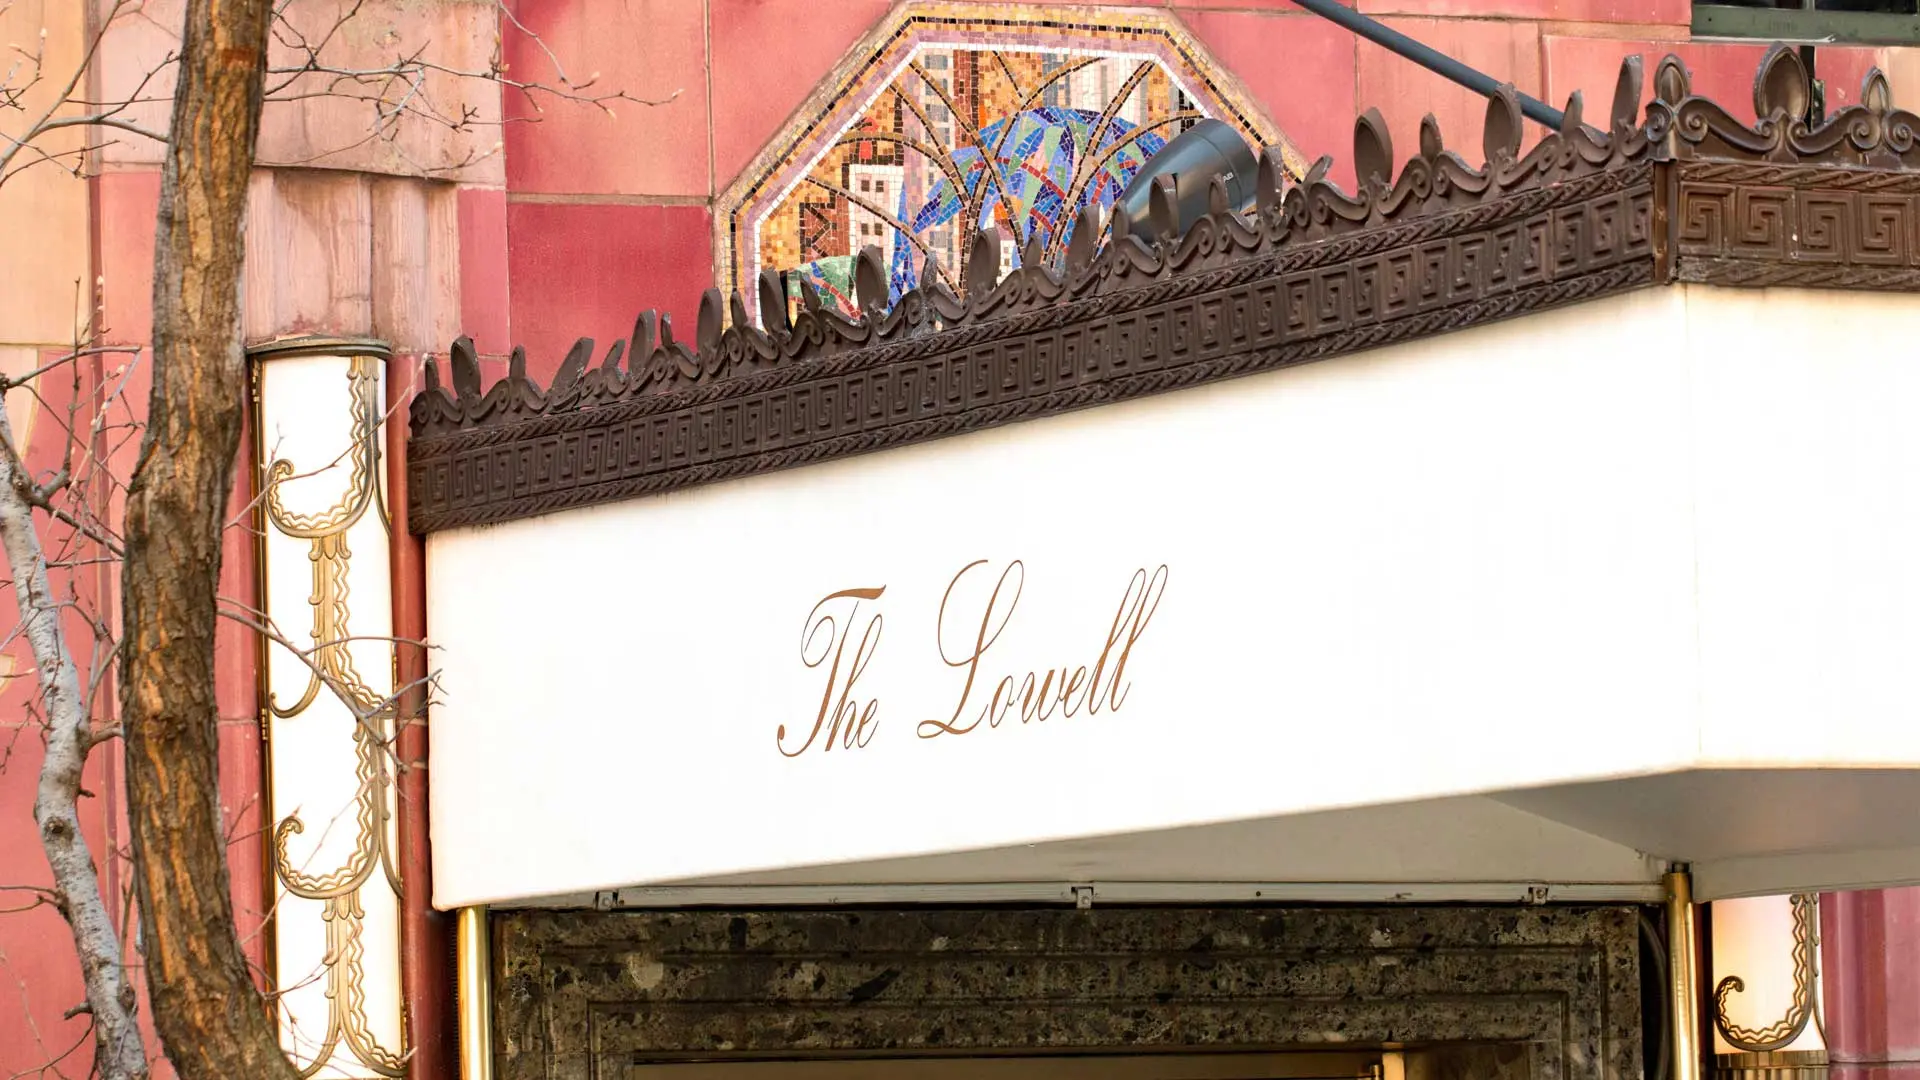 The Lowell